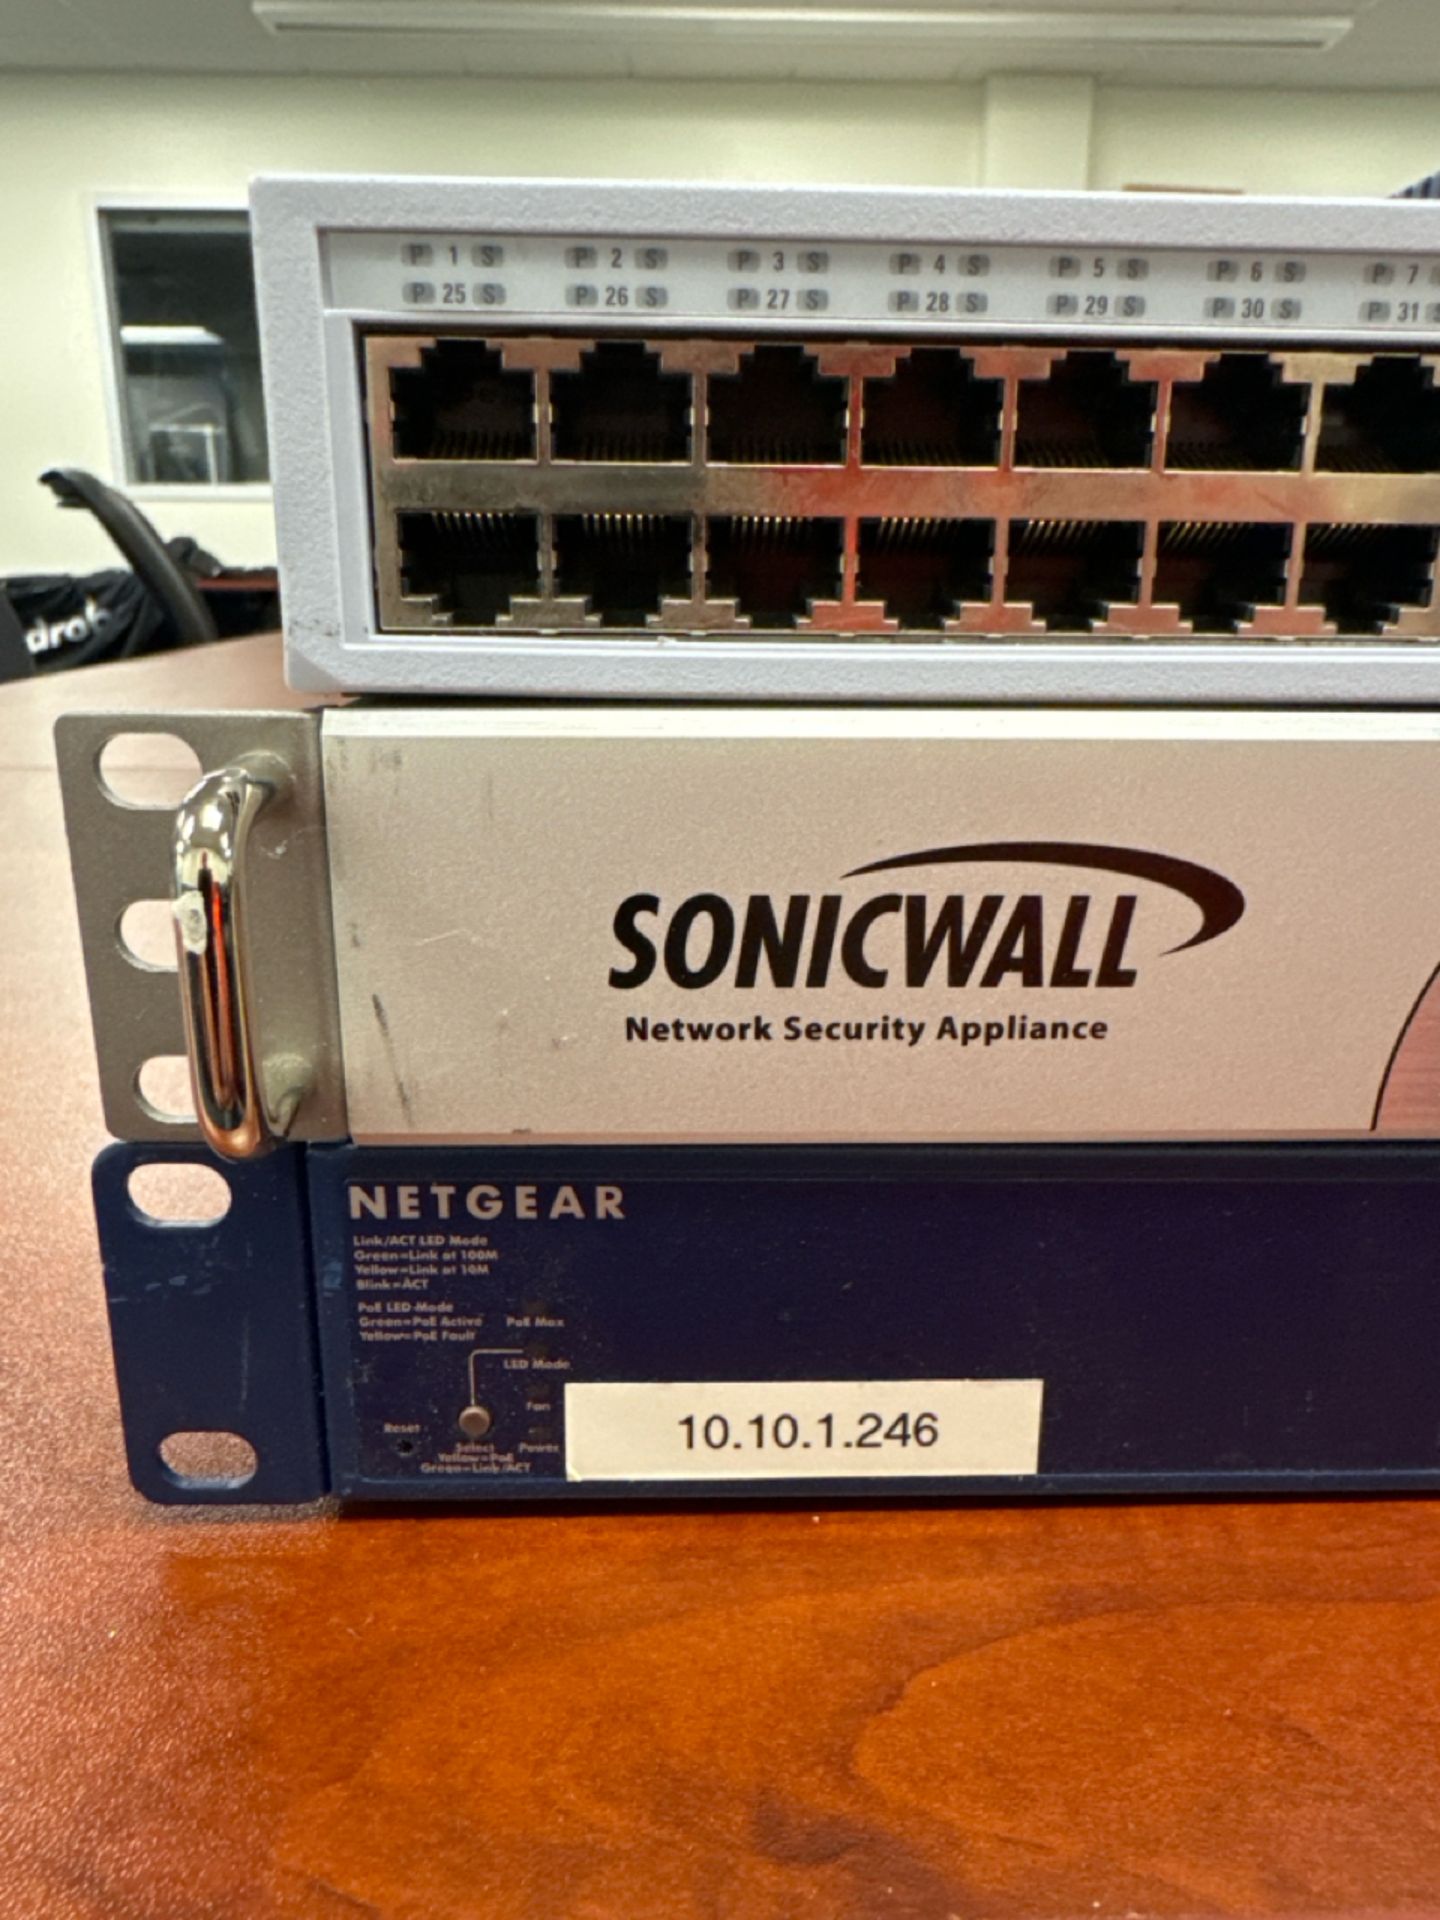 TUV Network Switch, (2) Netgear Network Switches, & Sonicwall Network Switch Boards - Image 4 of 6